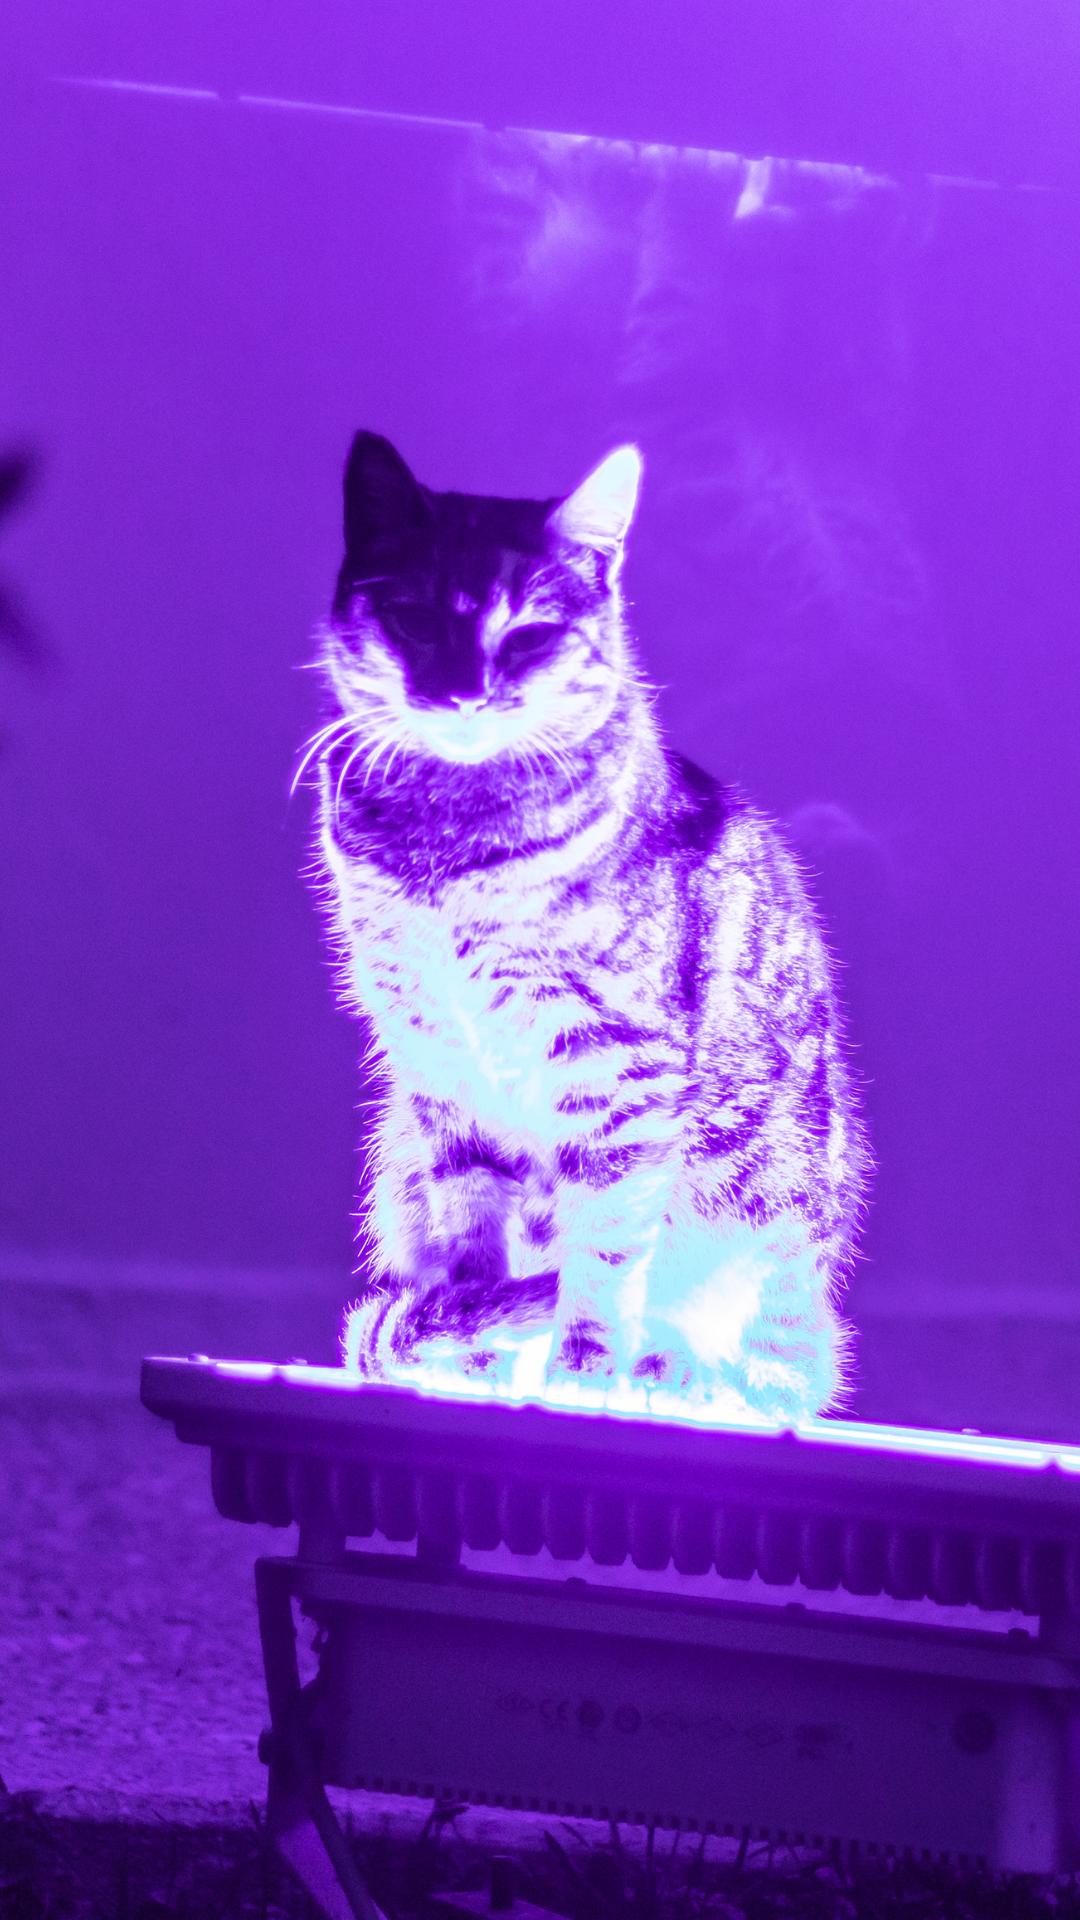 A cat sitting on a bench with a purple hue - Cat